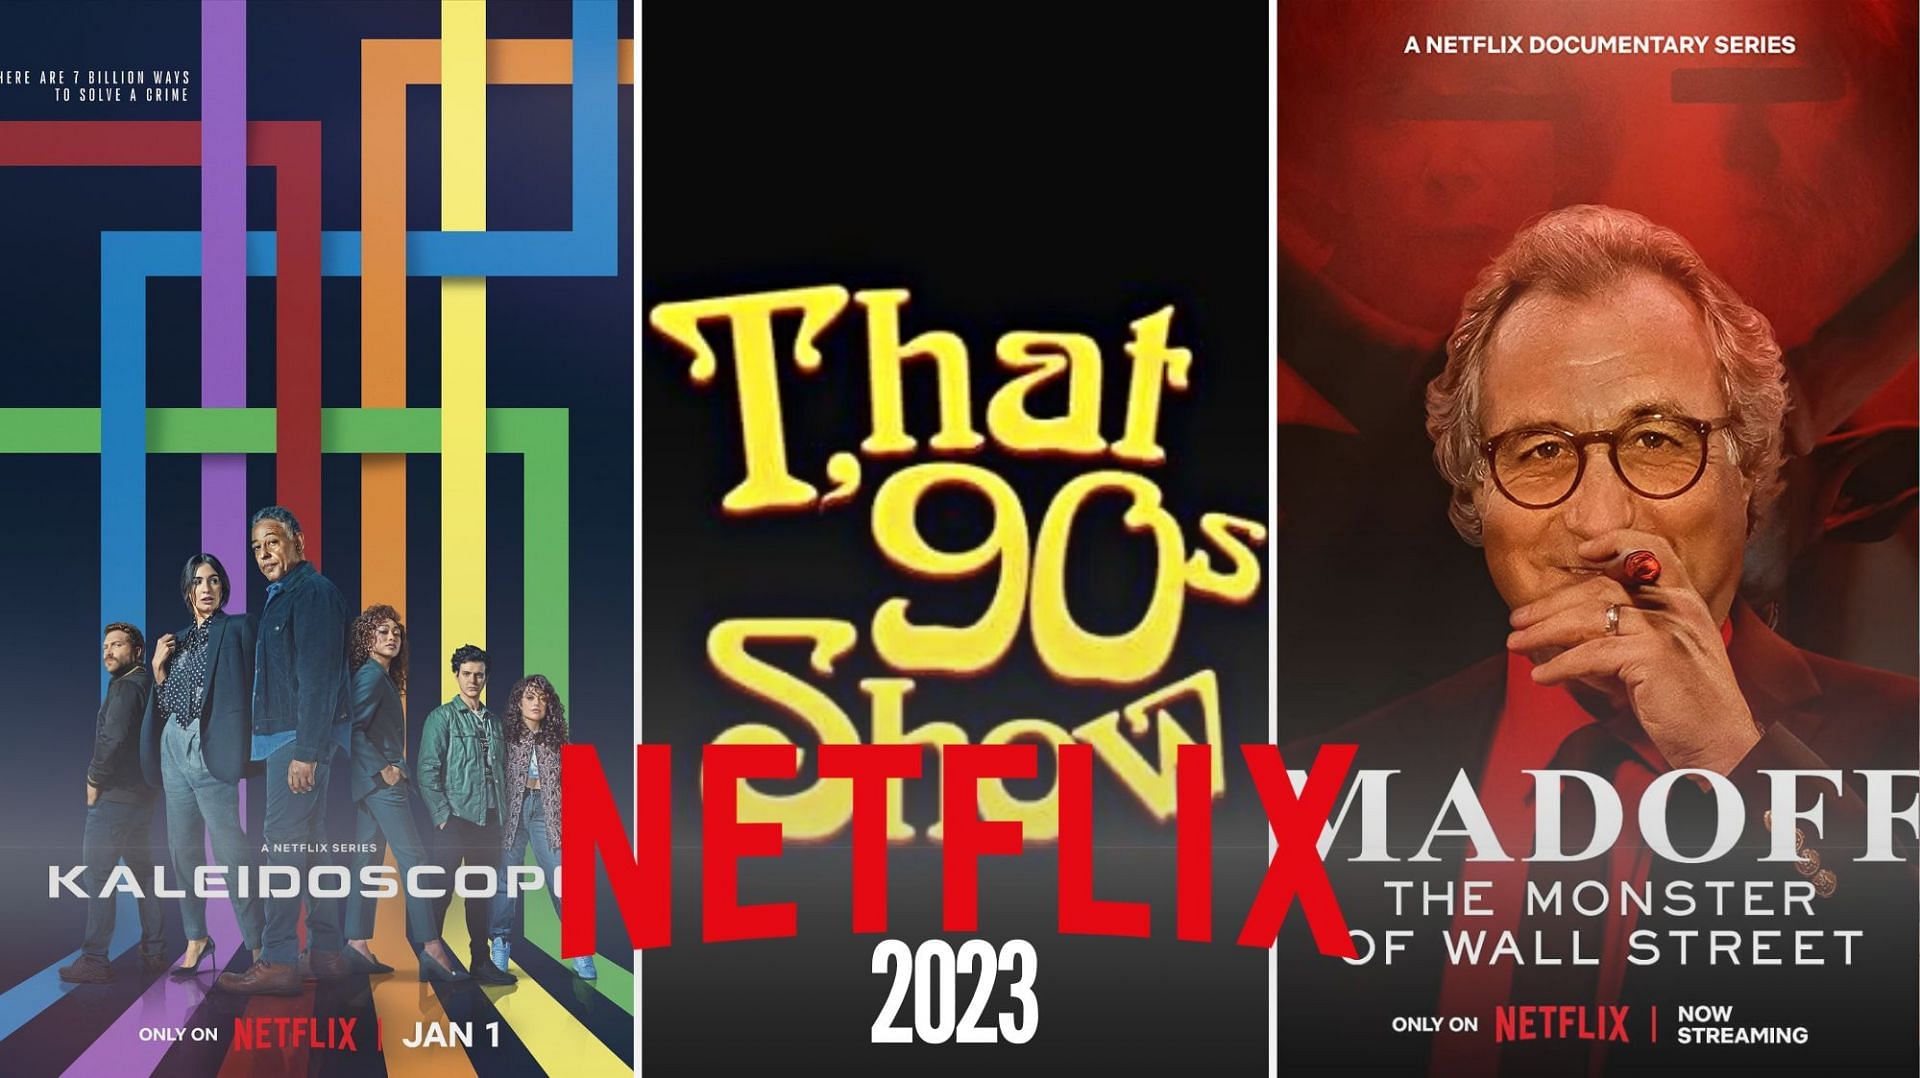 January 2023 5 new Netflix movies and shows